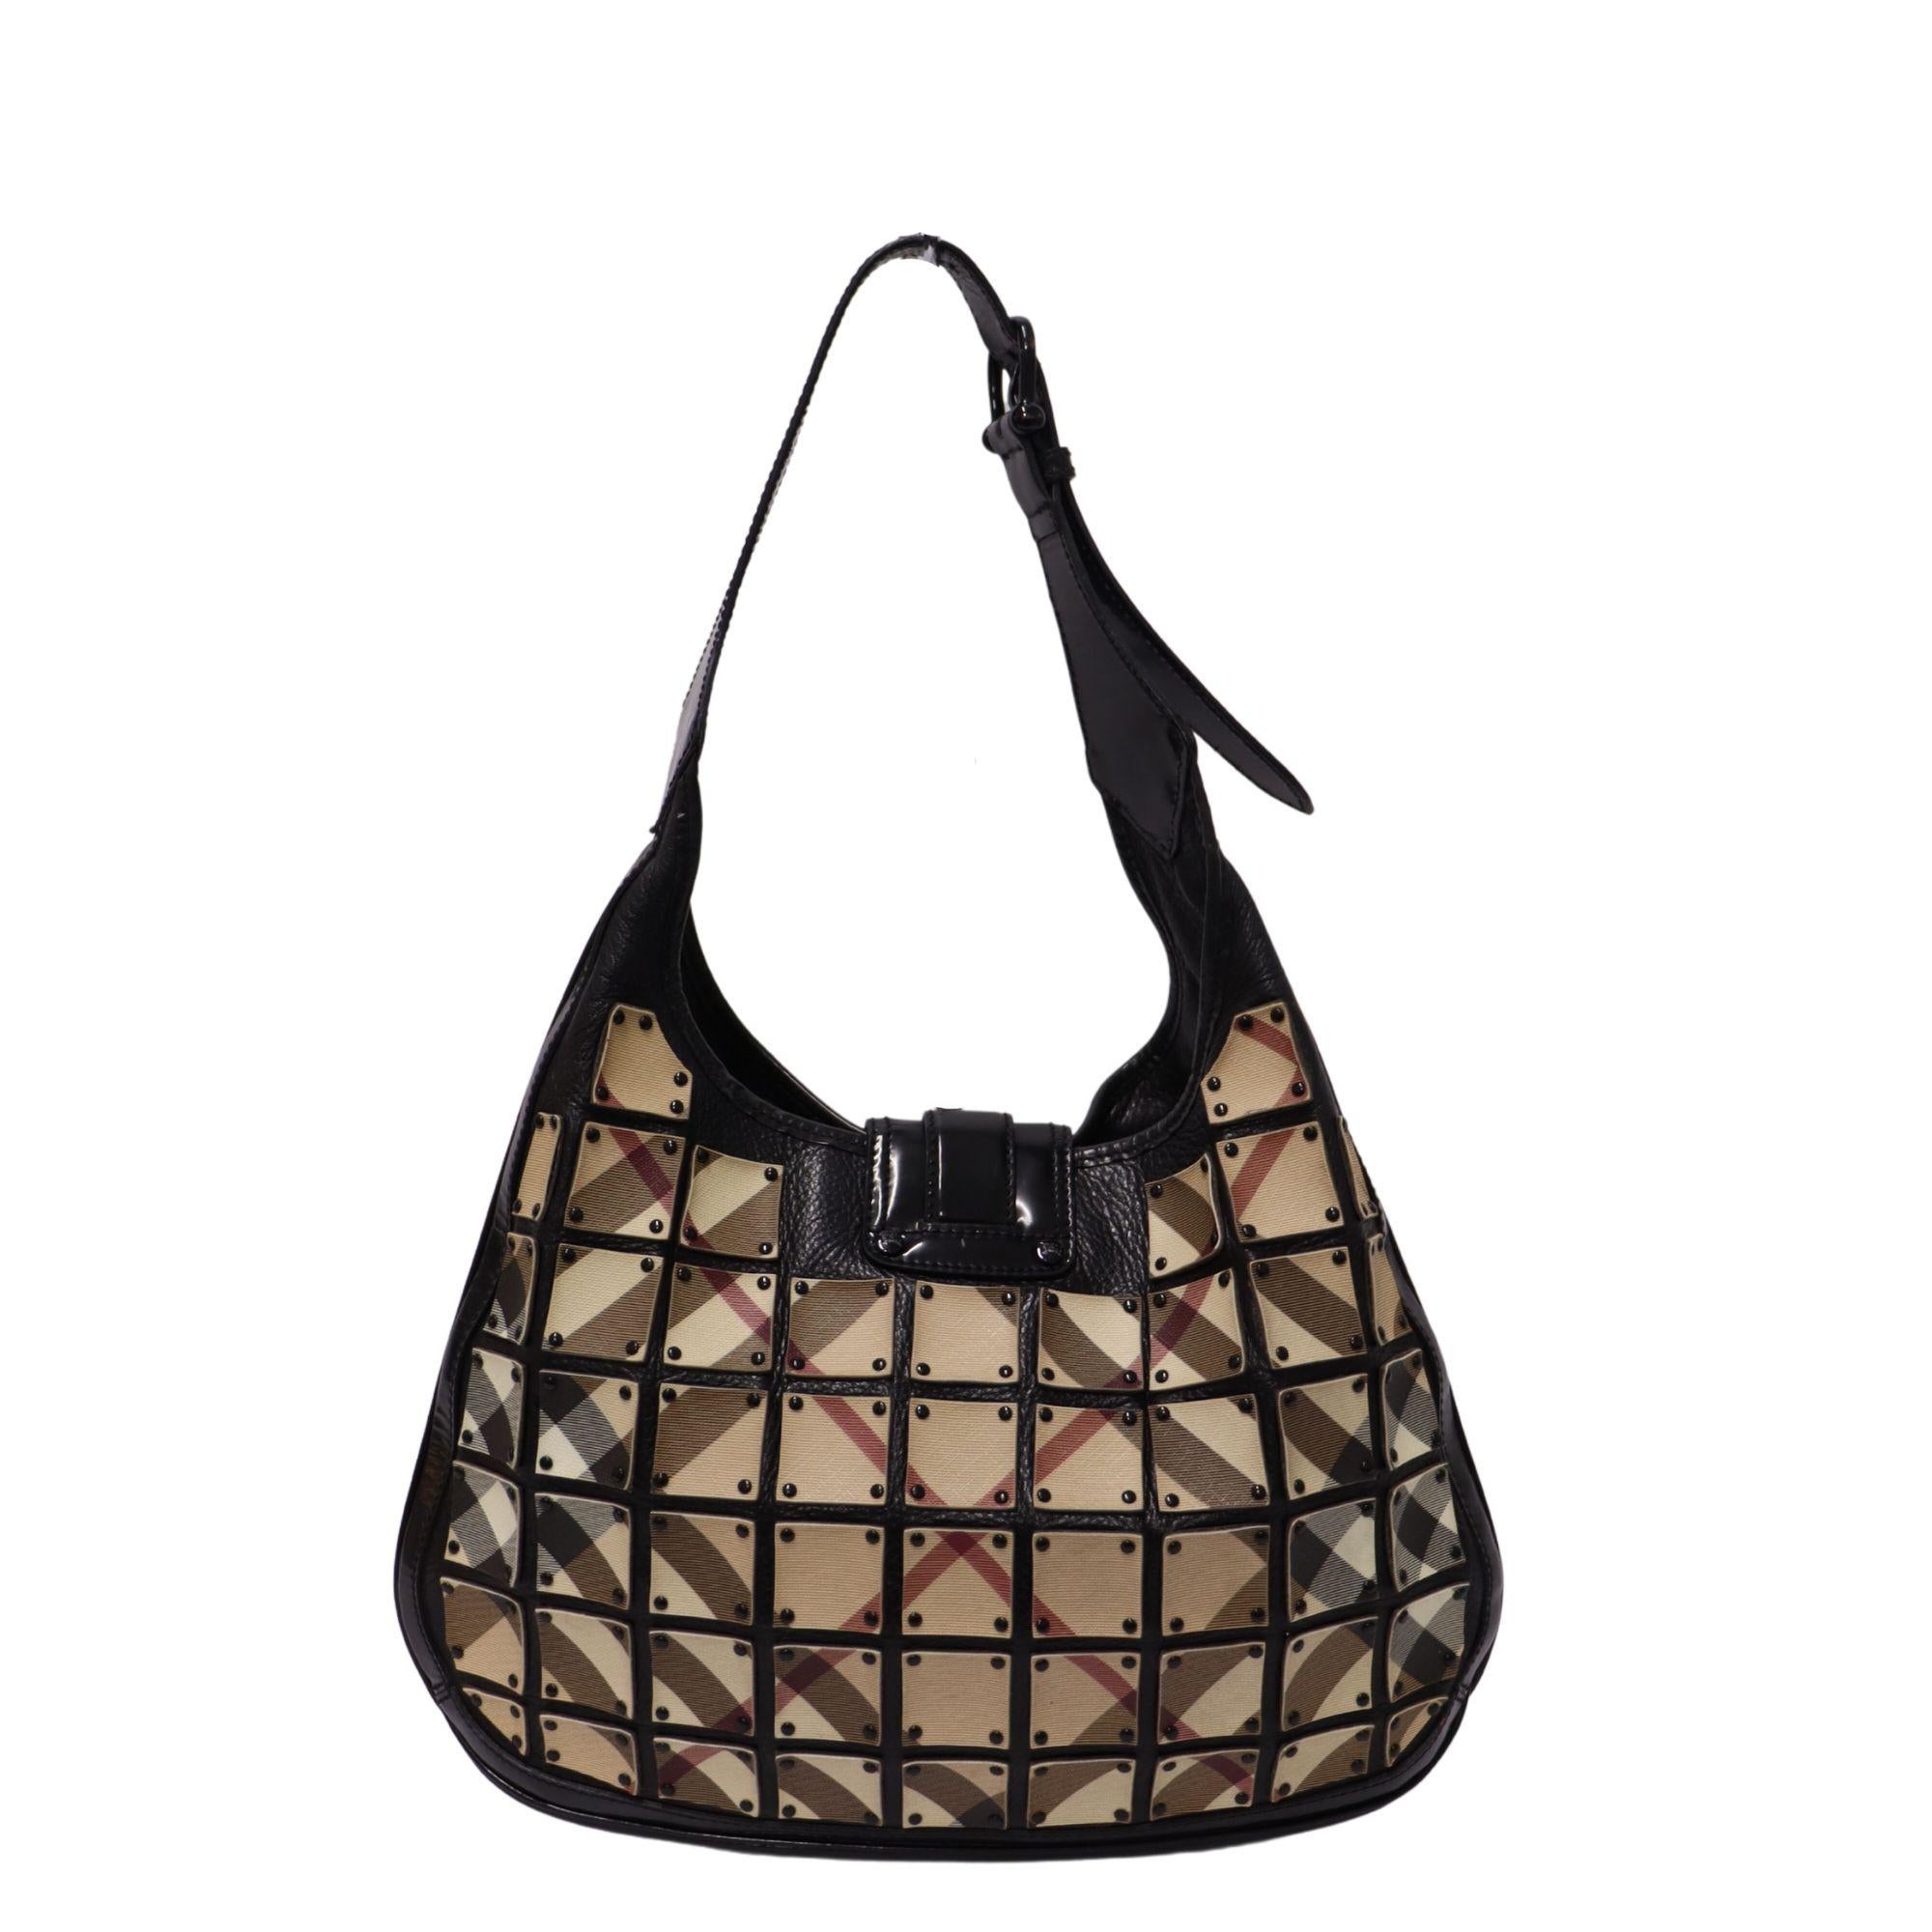 Burberry warrior nova check ‘Brooke’ Hobo. Featuring individual square panels of their iconic check print in canvas and black patent leather trim. The exterior features a buckle flap snap closure and a buckle detailed shoulder handle. Interior is